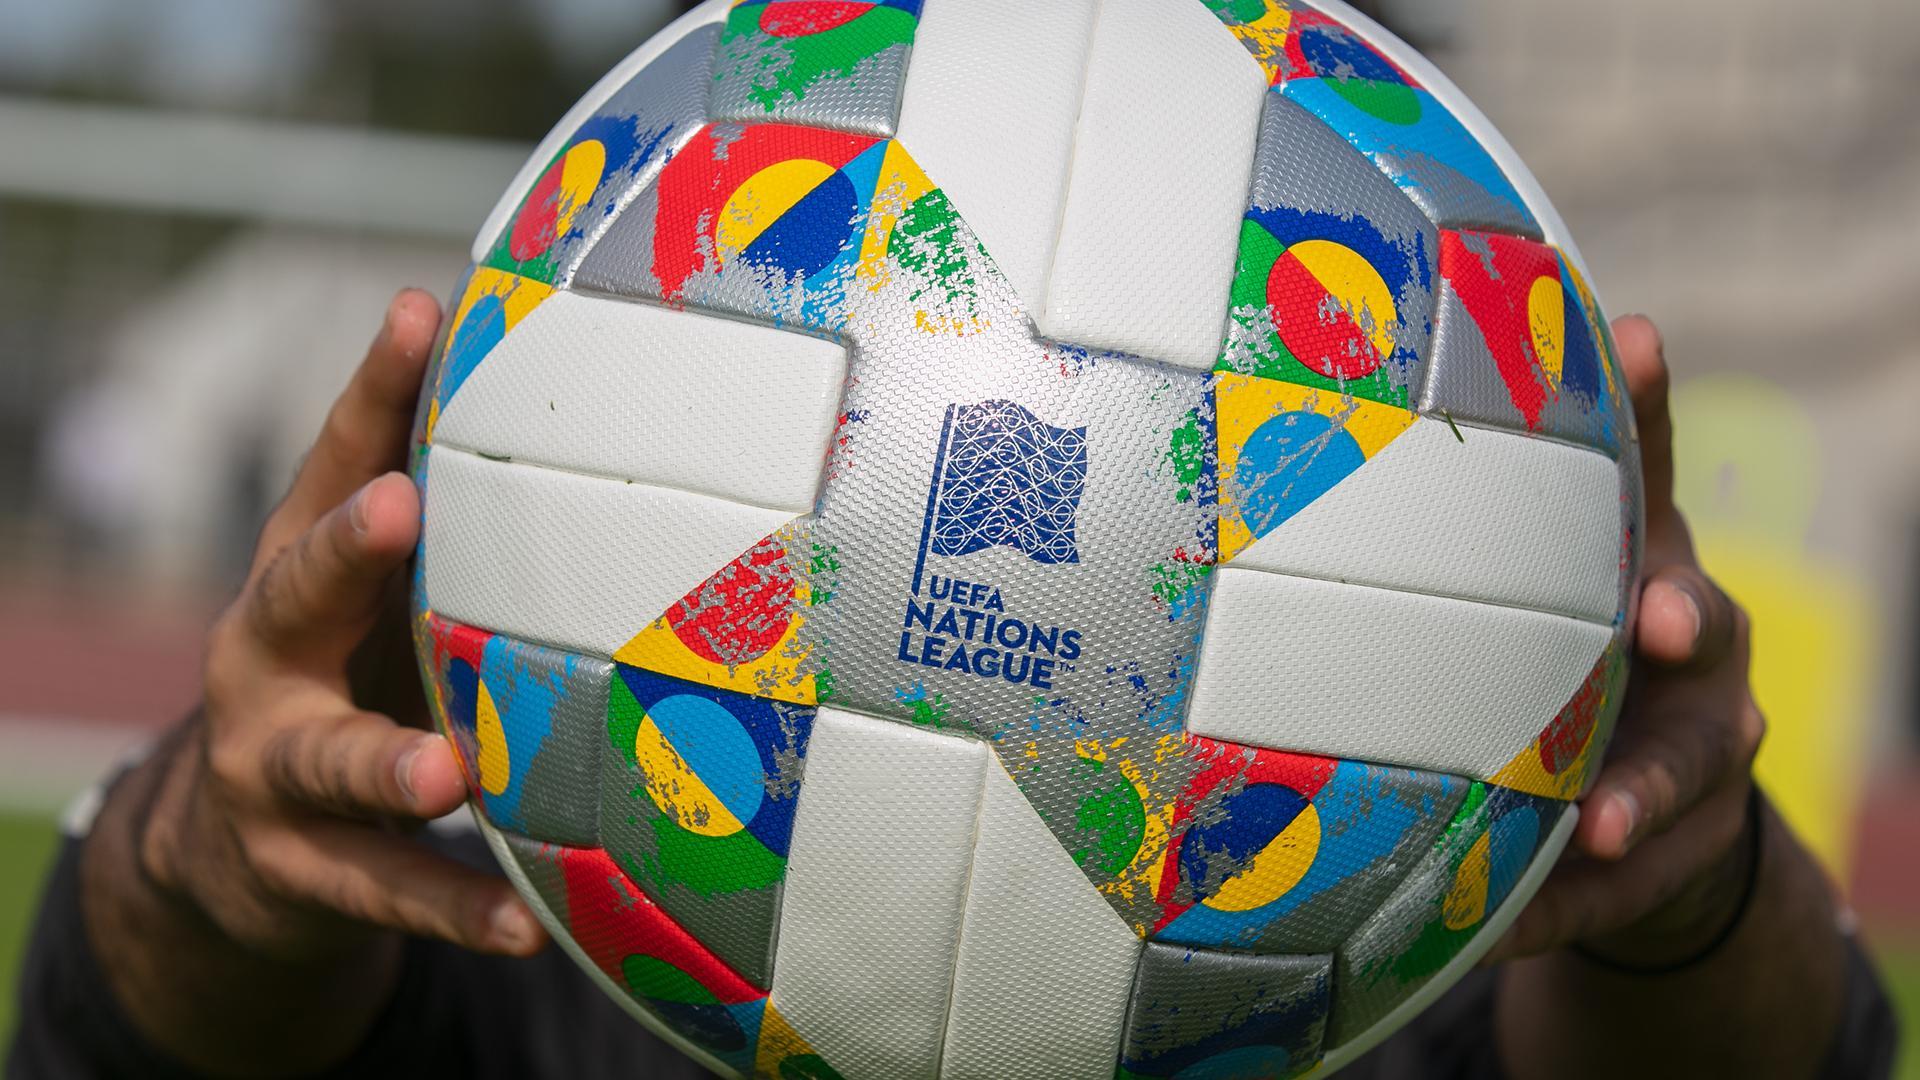 Uefa Nations League: Official match ball for new competition